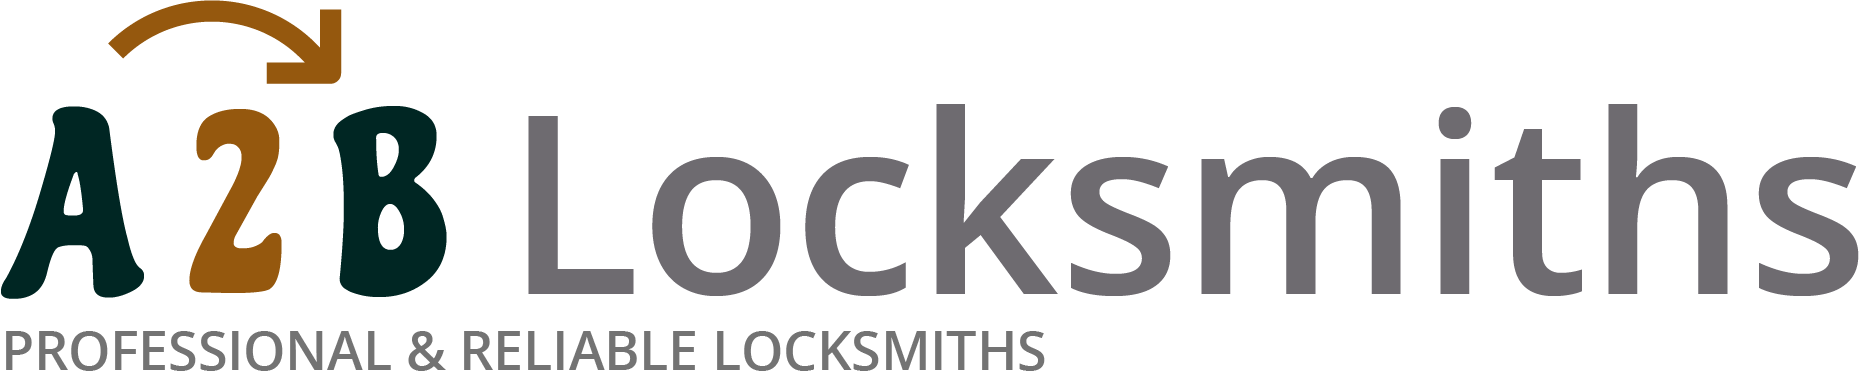 If you are locked out of house in Lytham St Annes, our 24/7 local emergency locksmith services can help you.